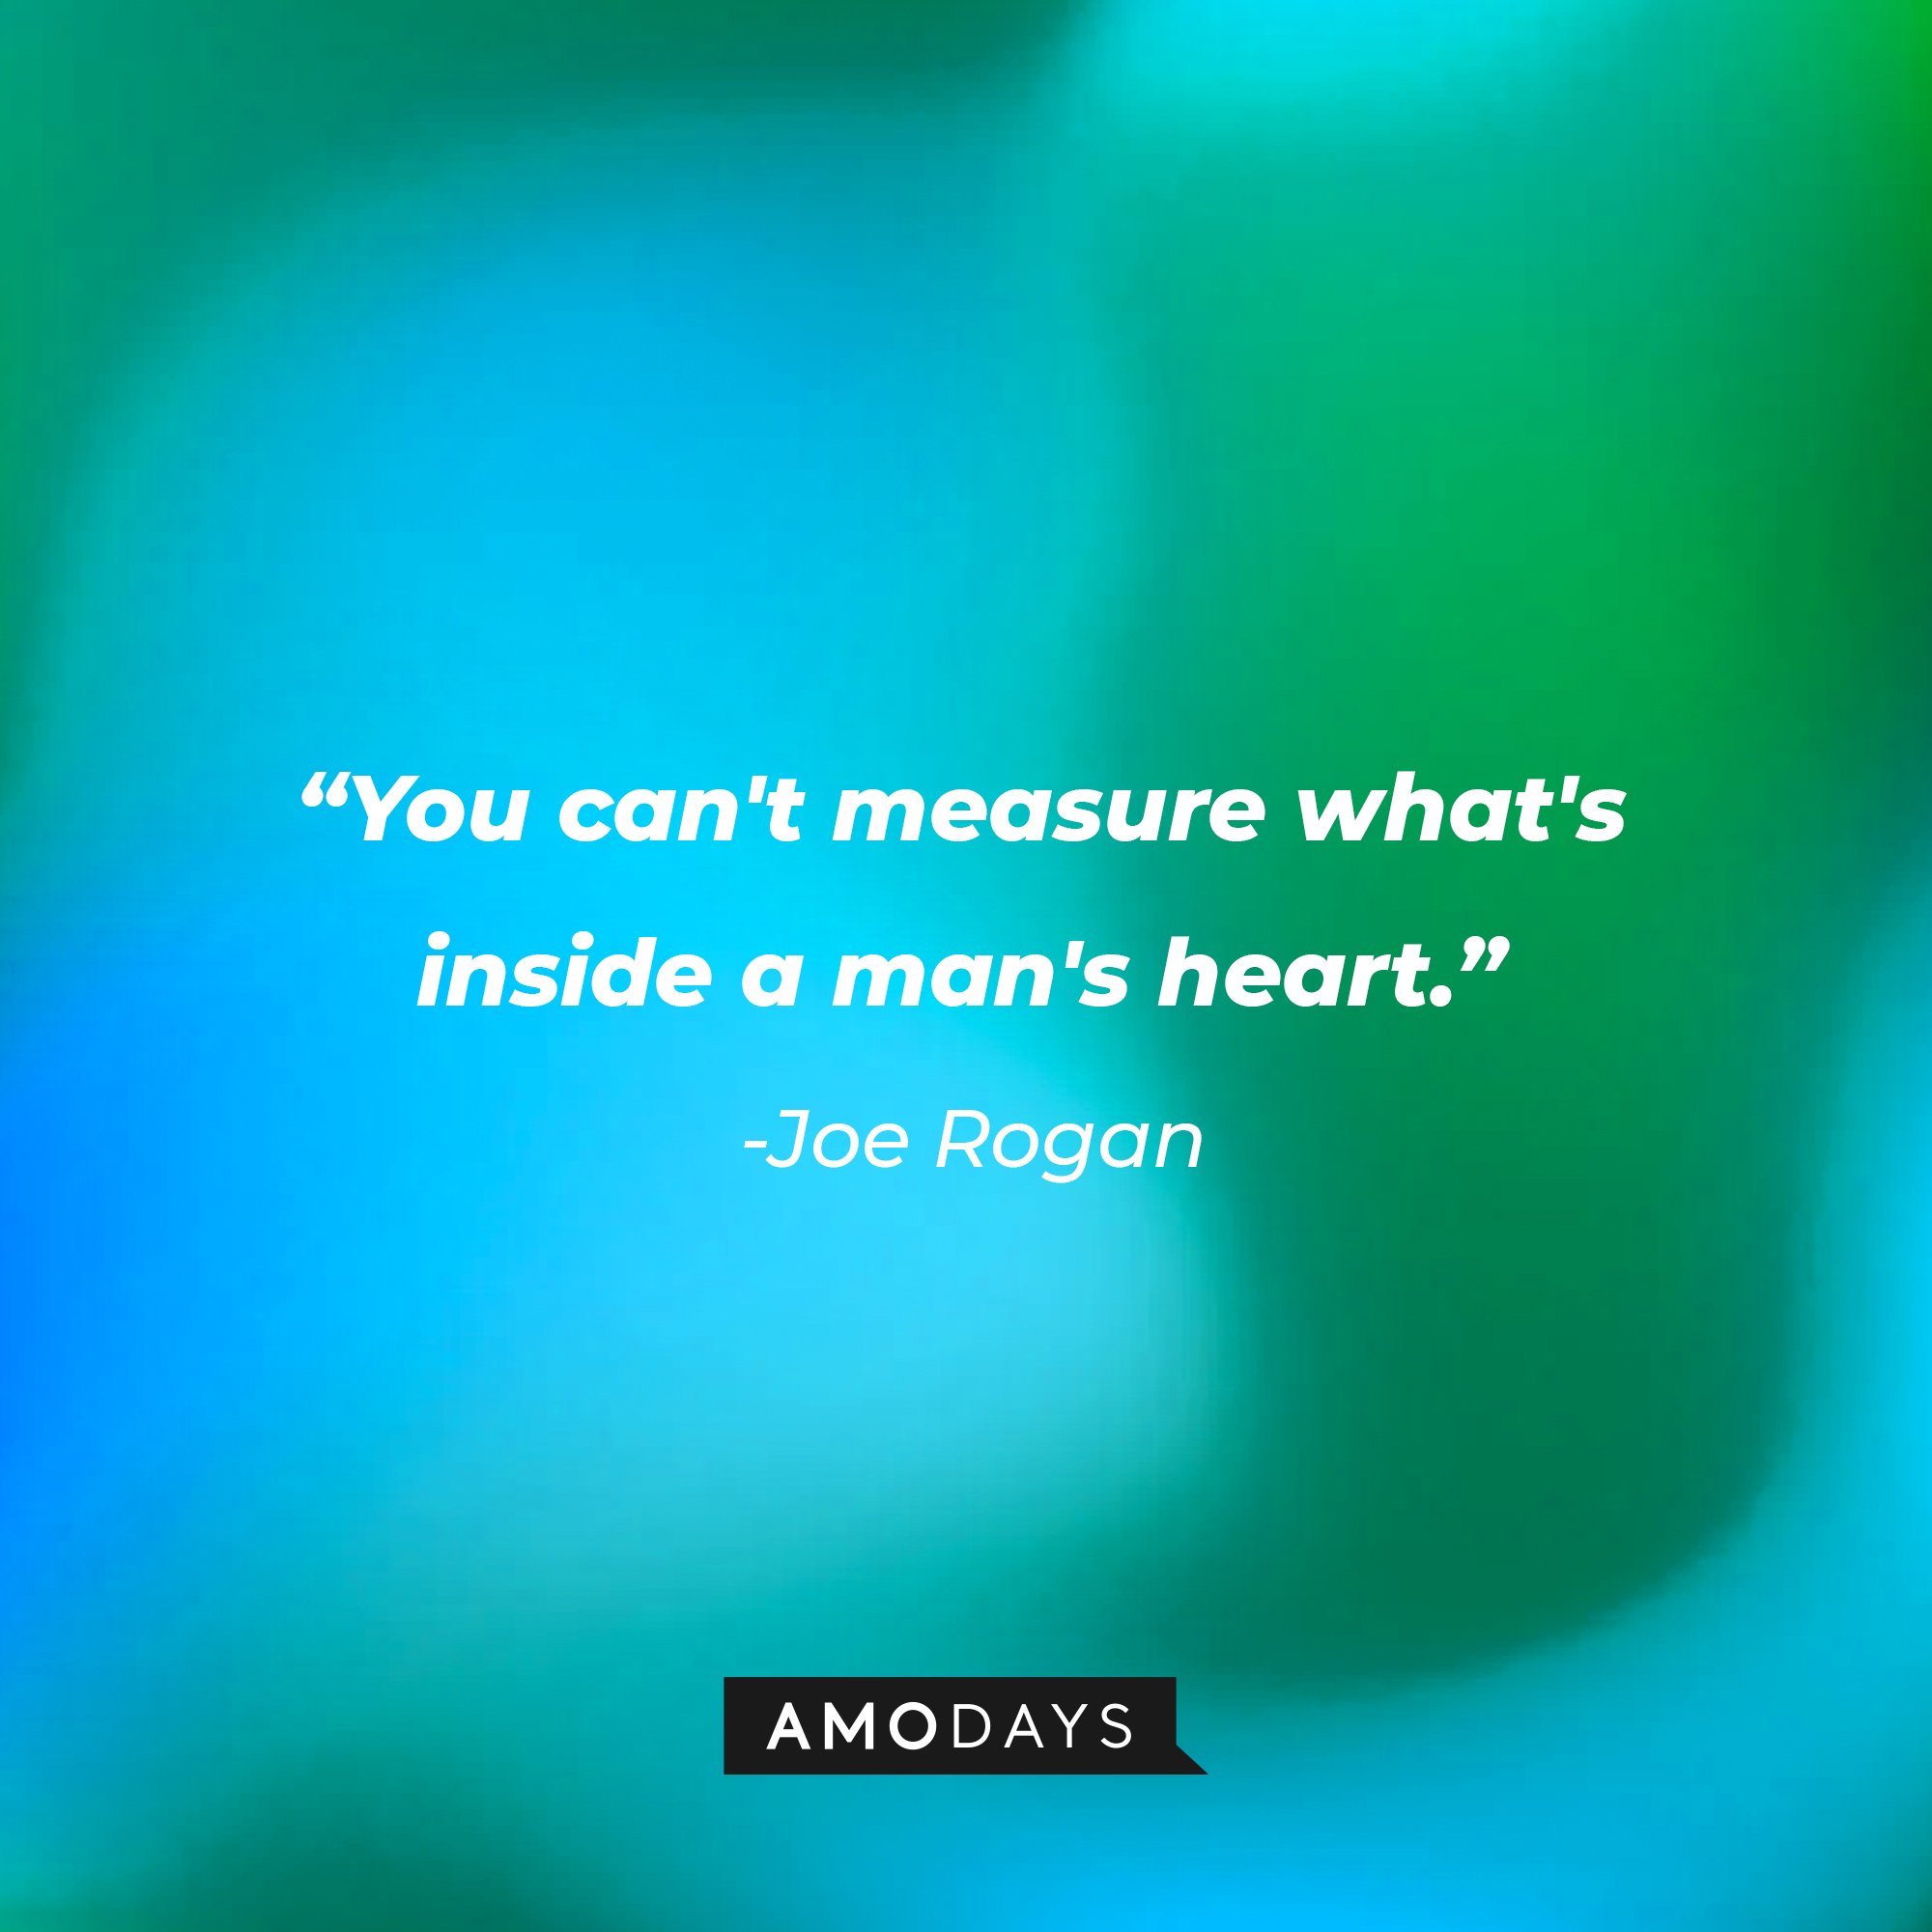 Joe Rogan's quote: "You can't measure what's inside a man's heart." | Image: AmoDays